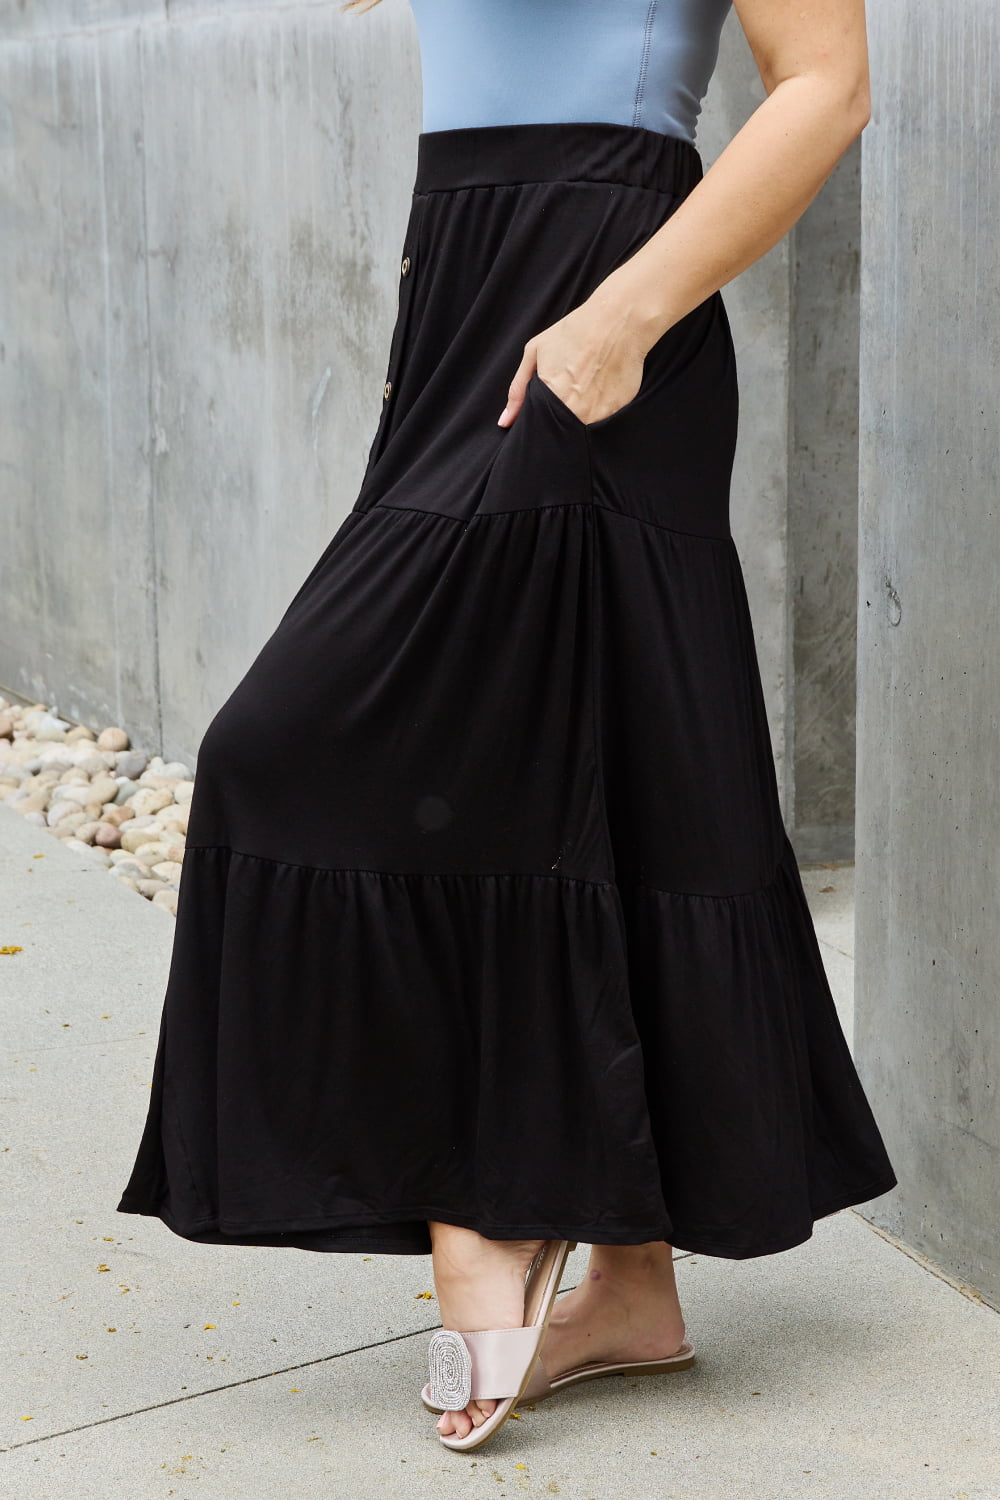 Solid Maxi Skirt